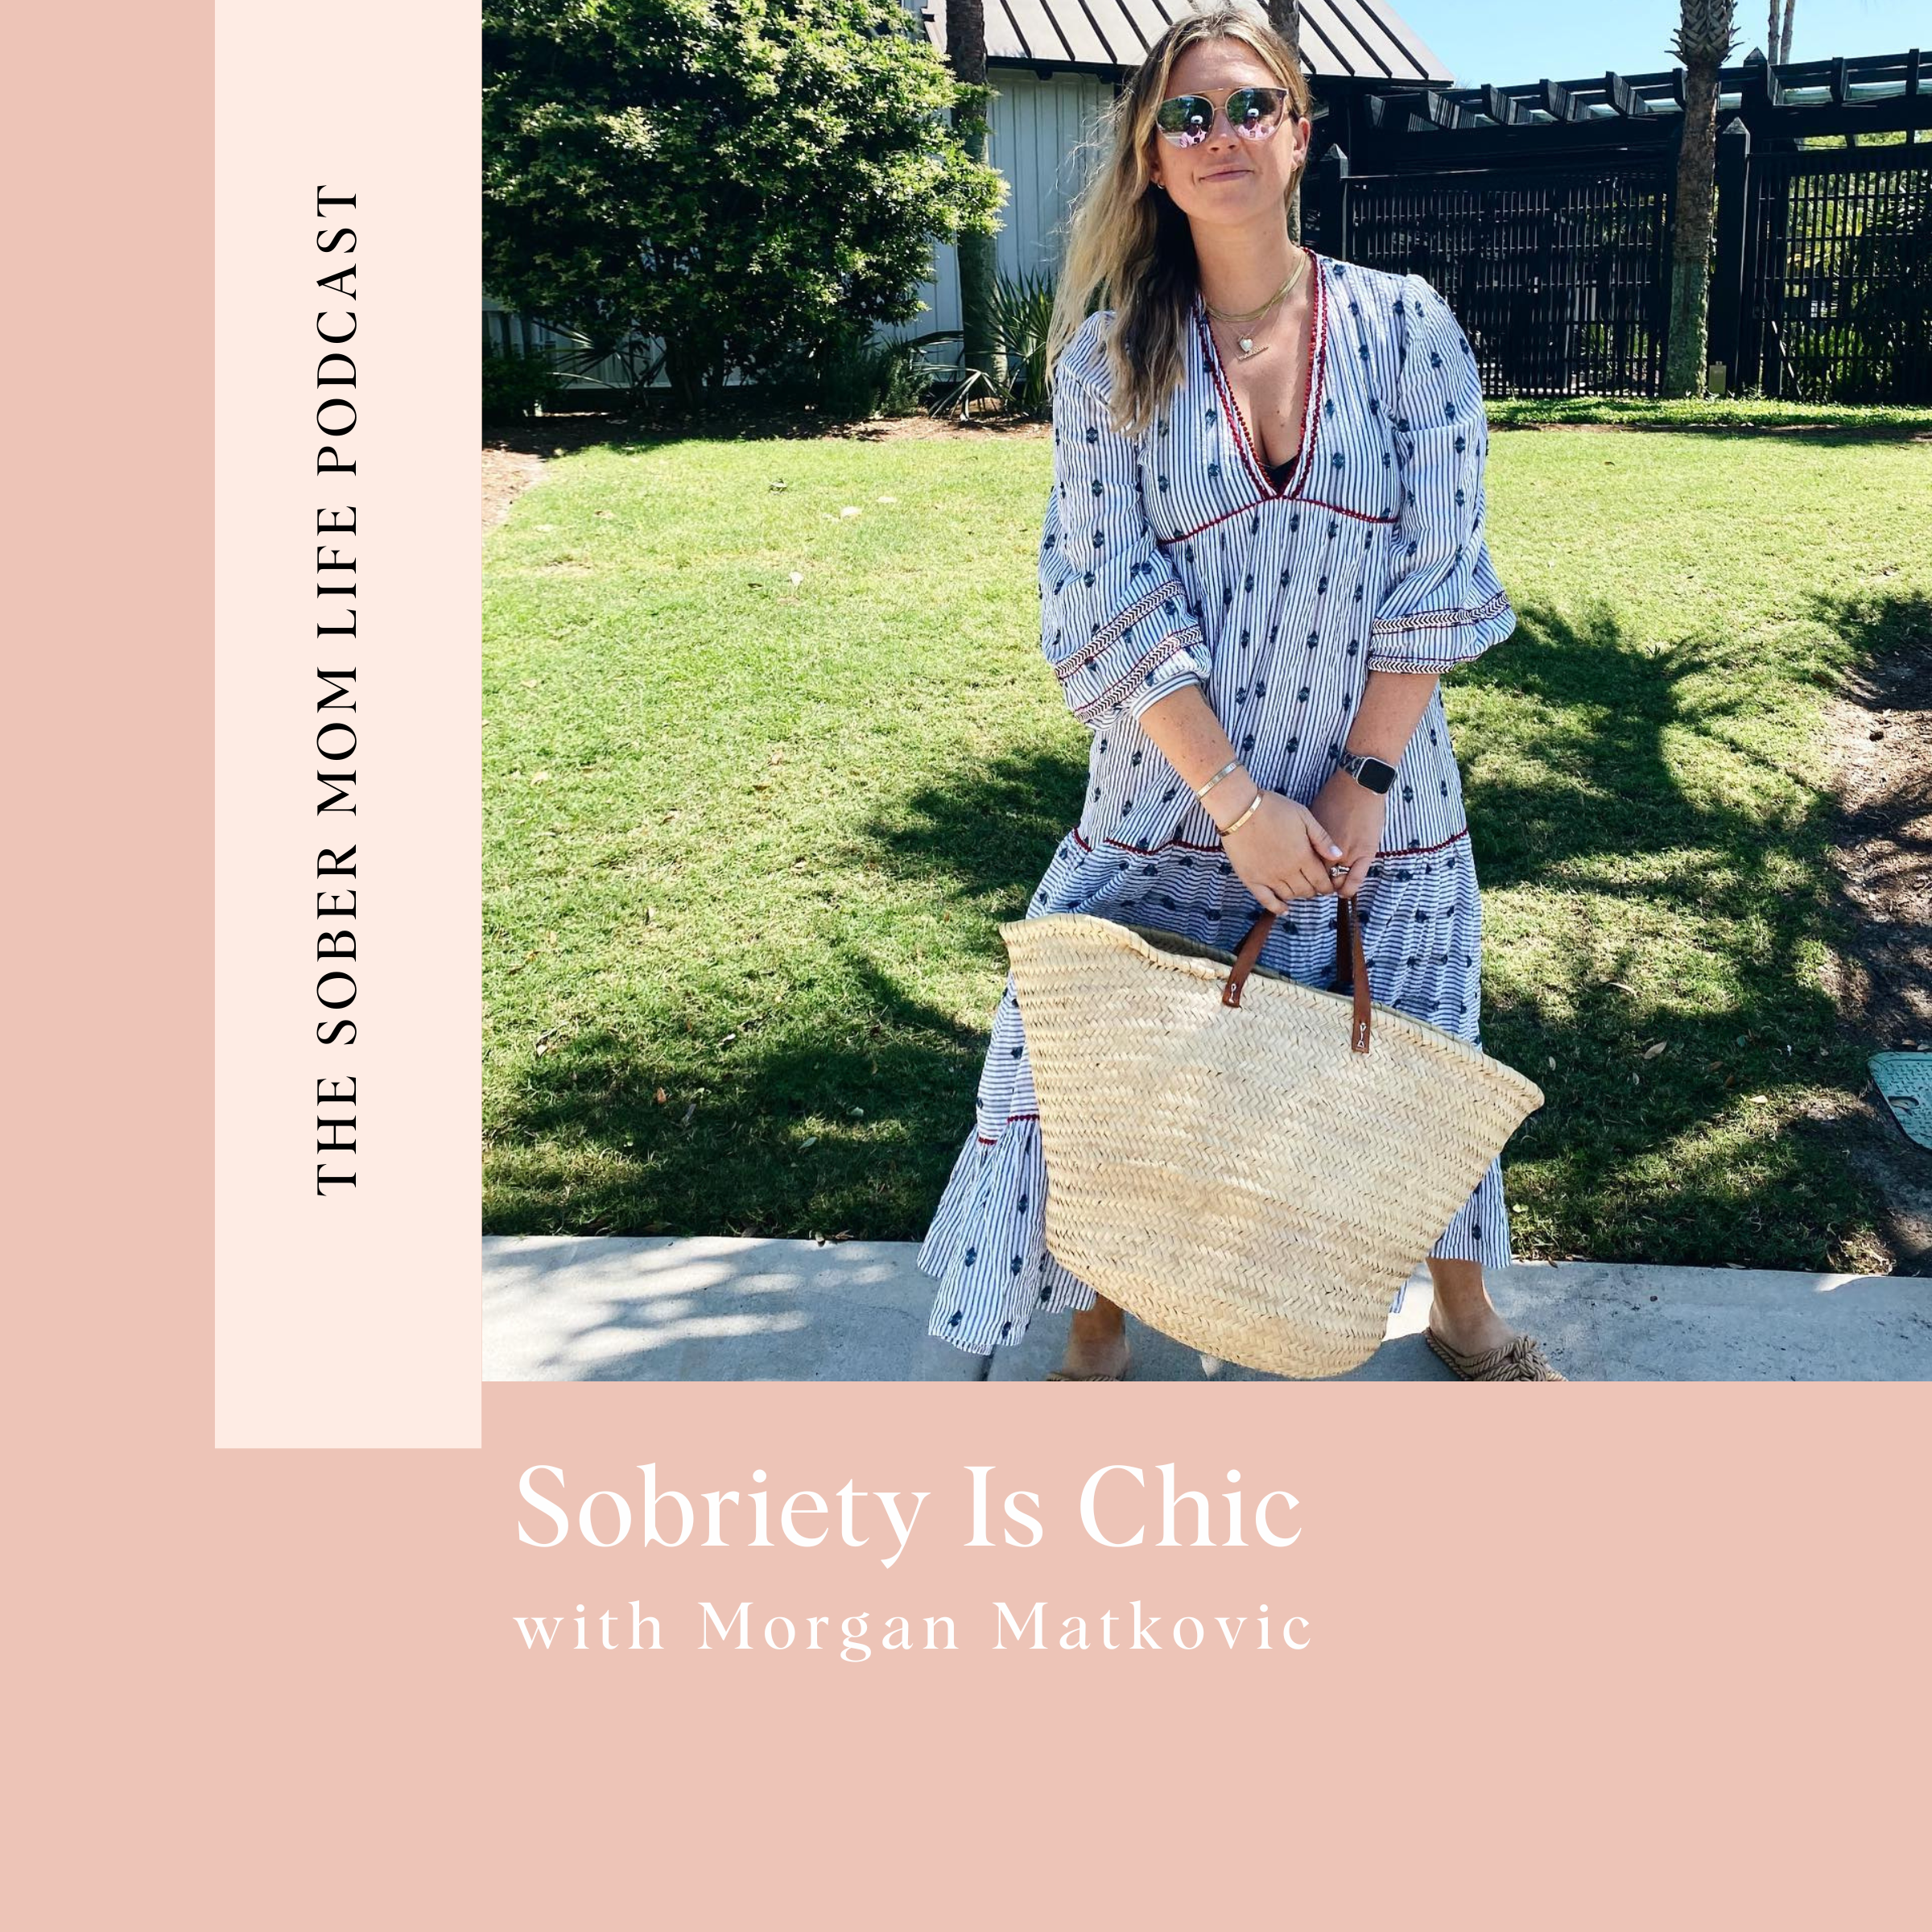 Sobriety is Chic with Morgan Matkovic